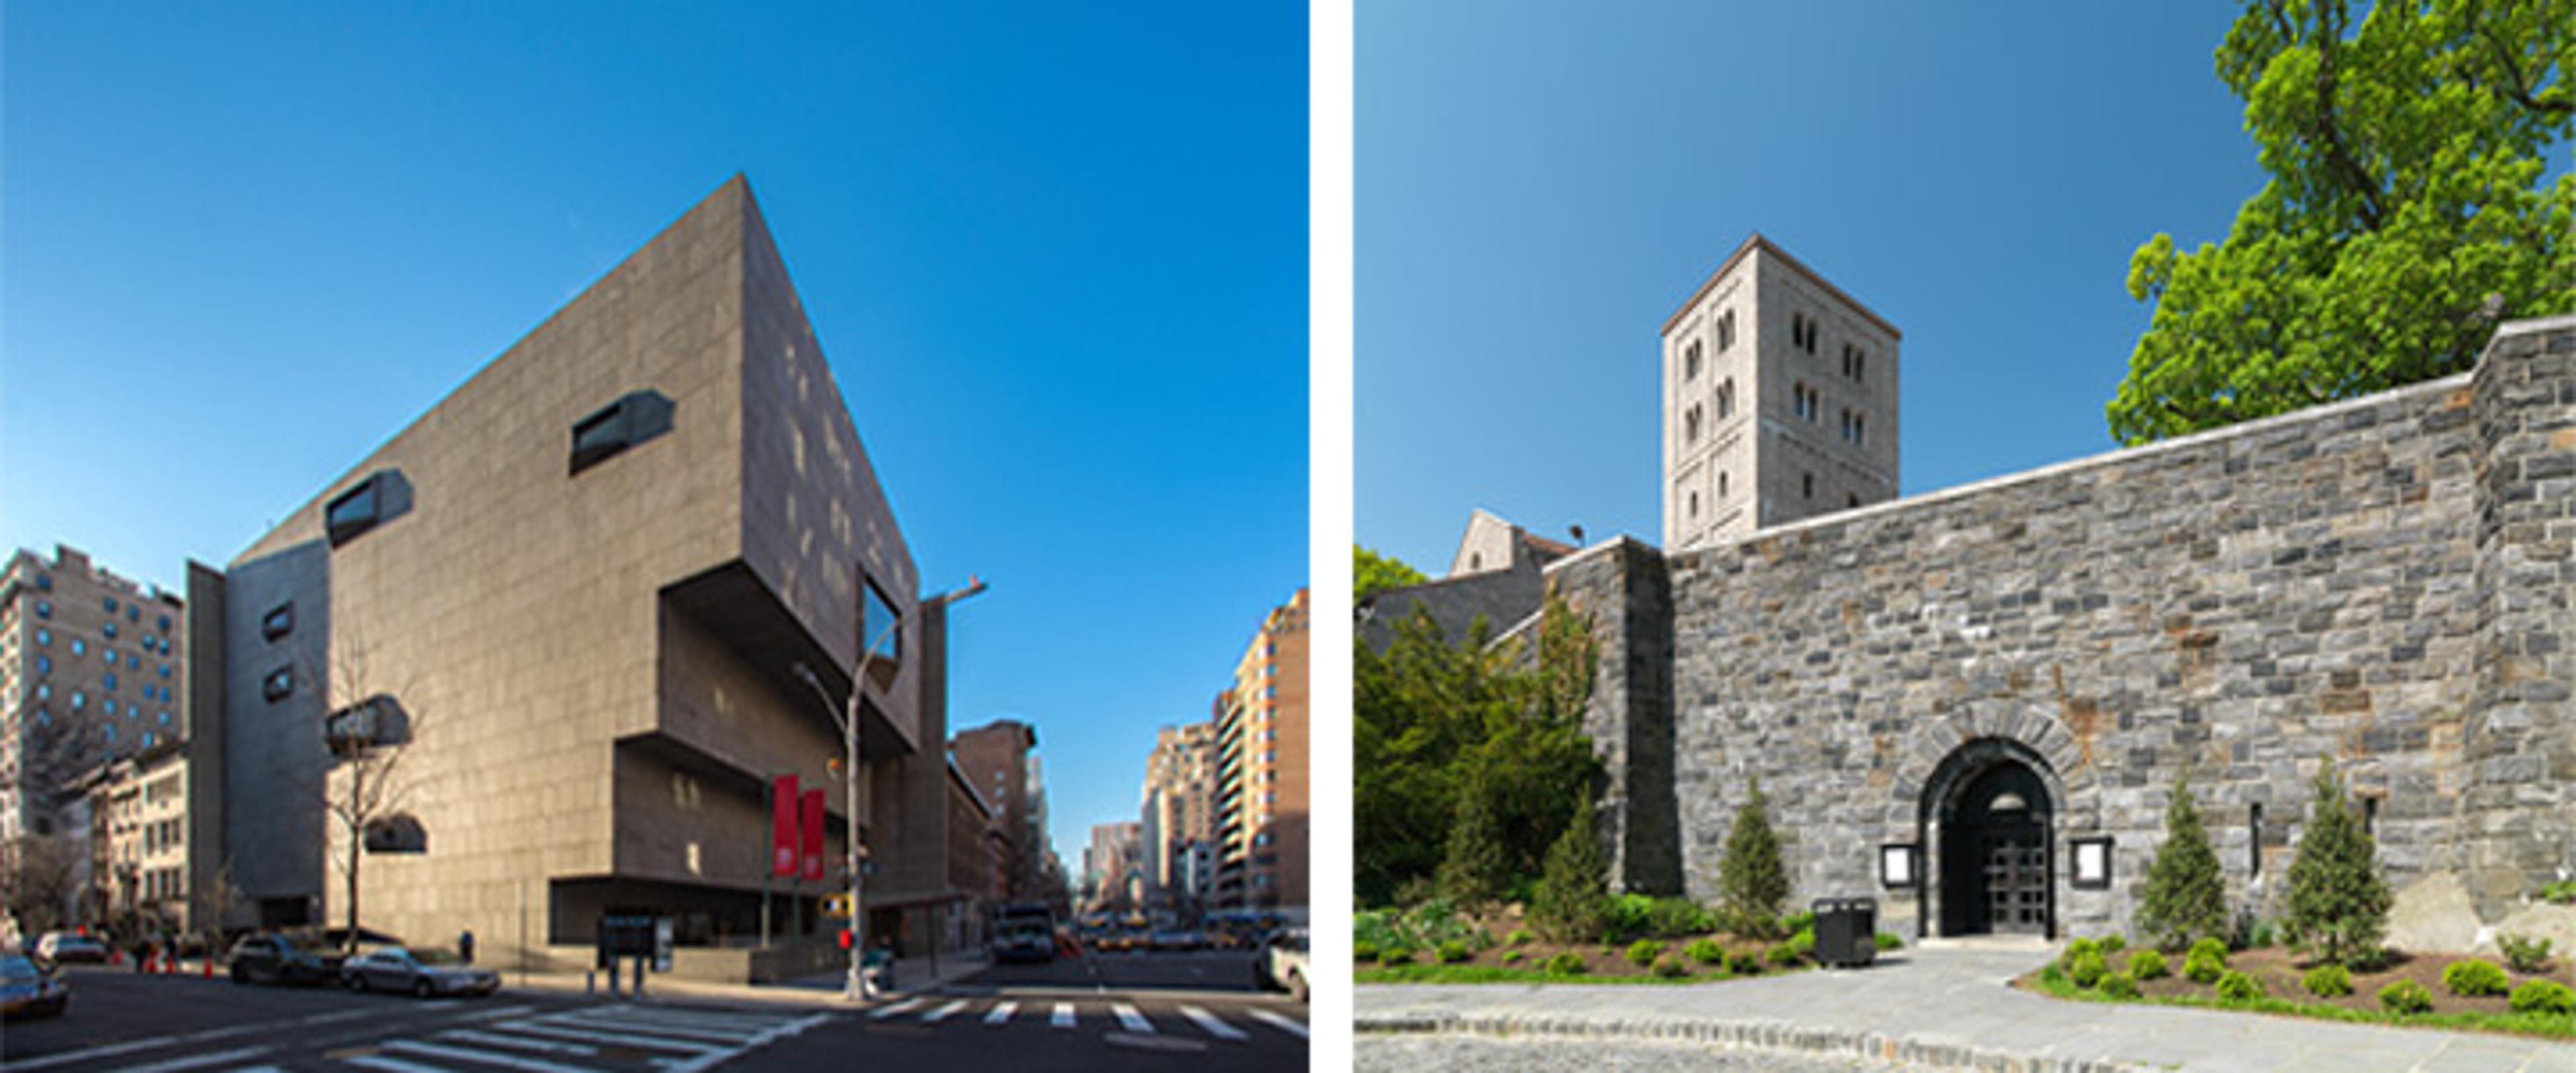 Breuer and Cloisters locations